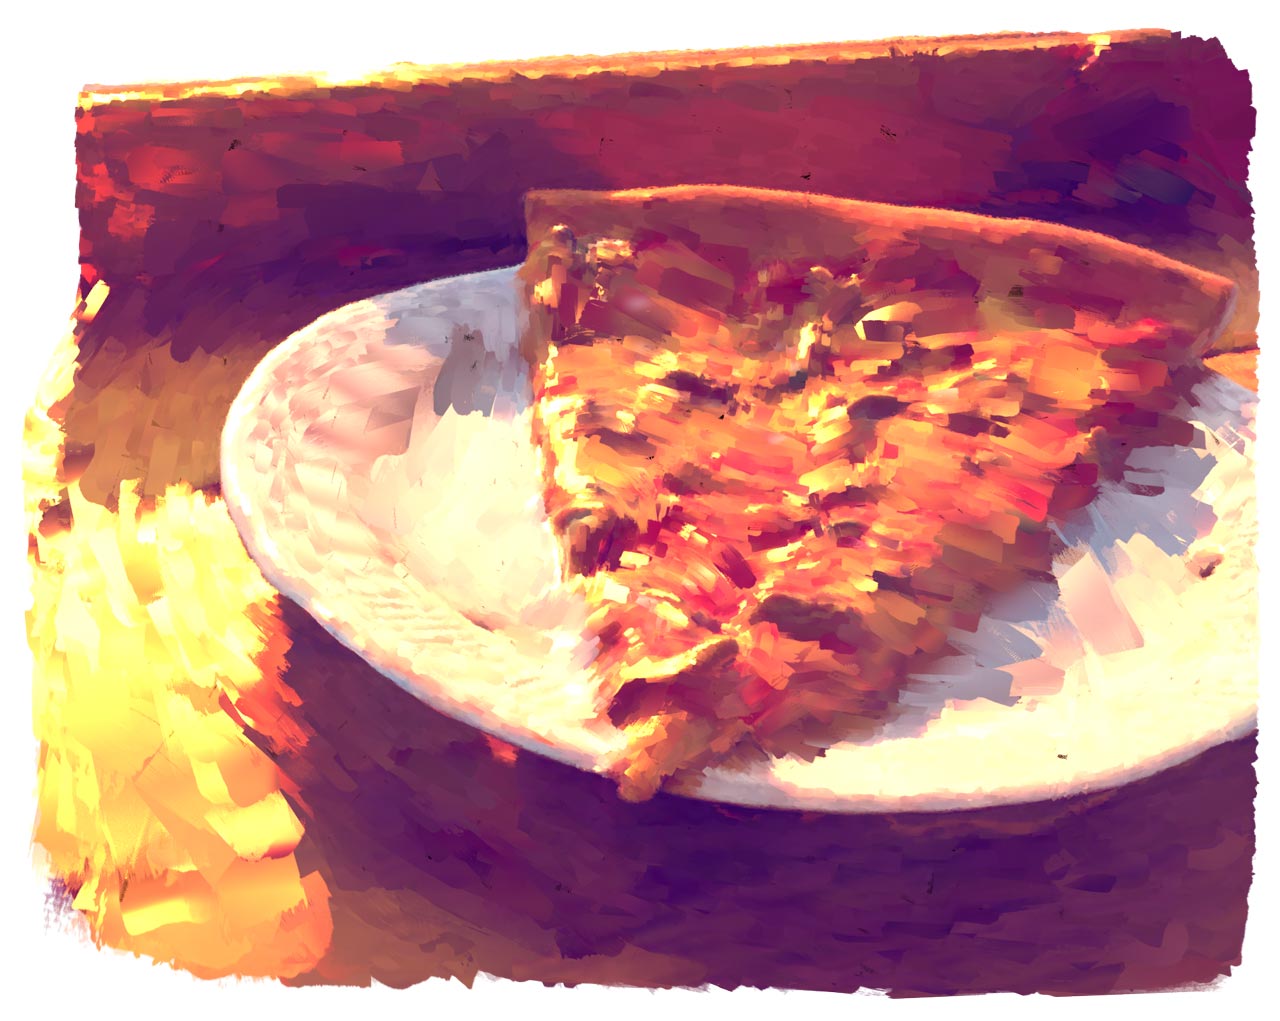 a drawing-like illustration of a pizza